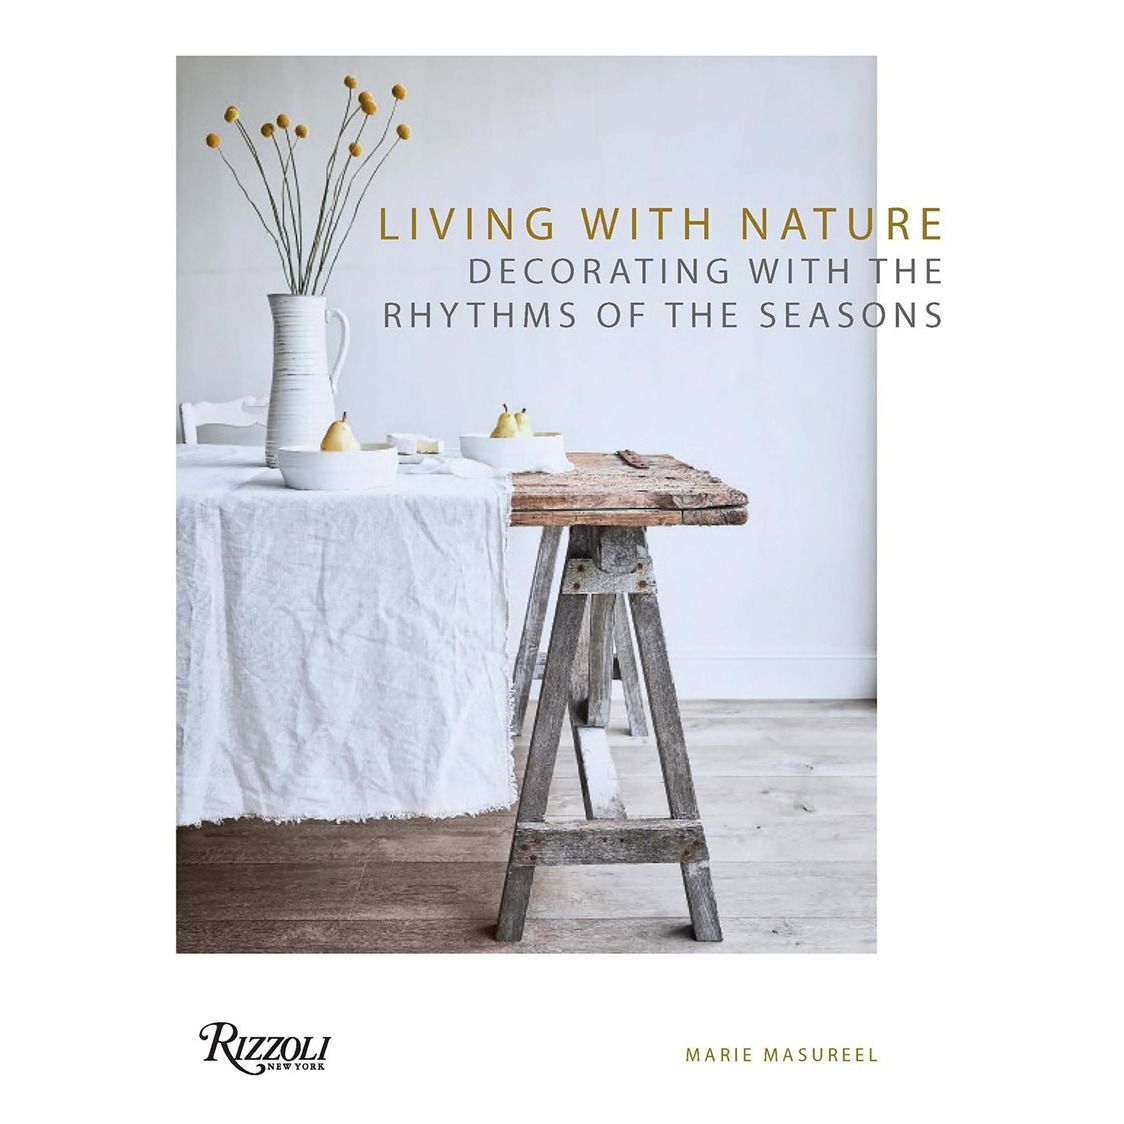 Rizzoli - Living with nature decorating with rhythmsÂ of the seasons - Blanc